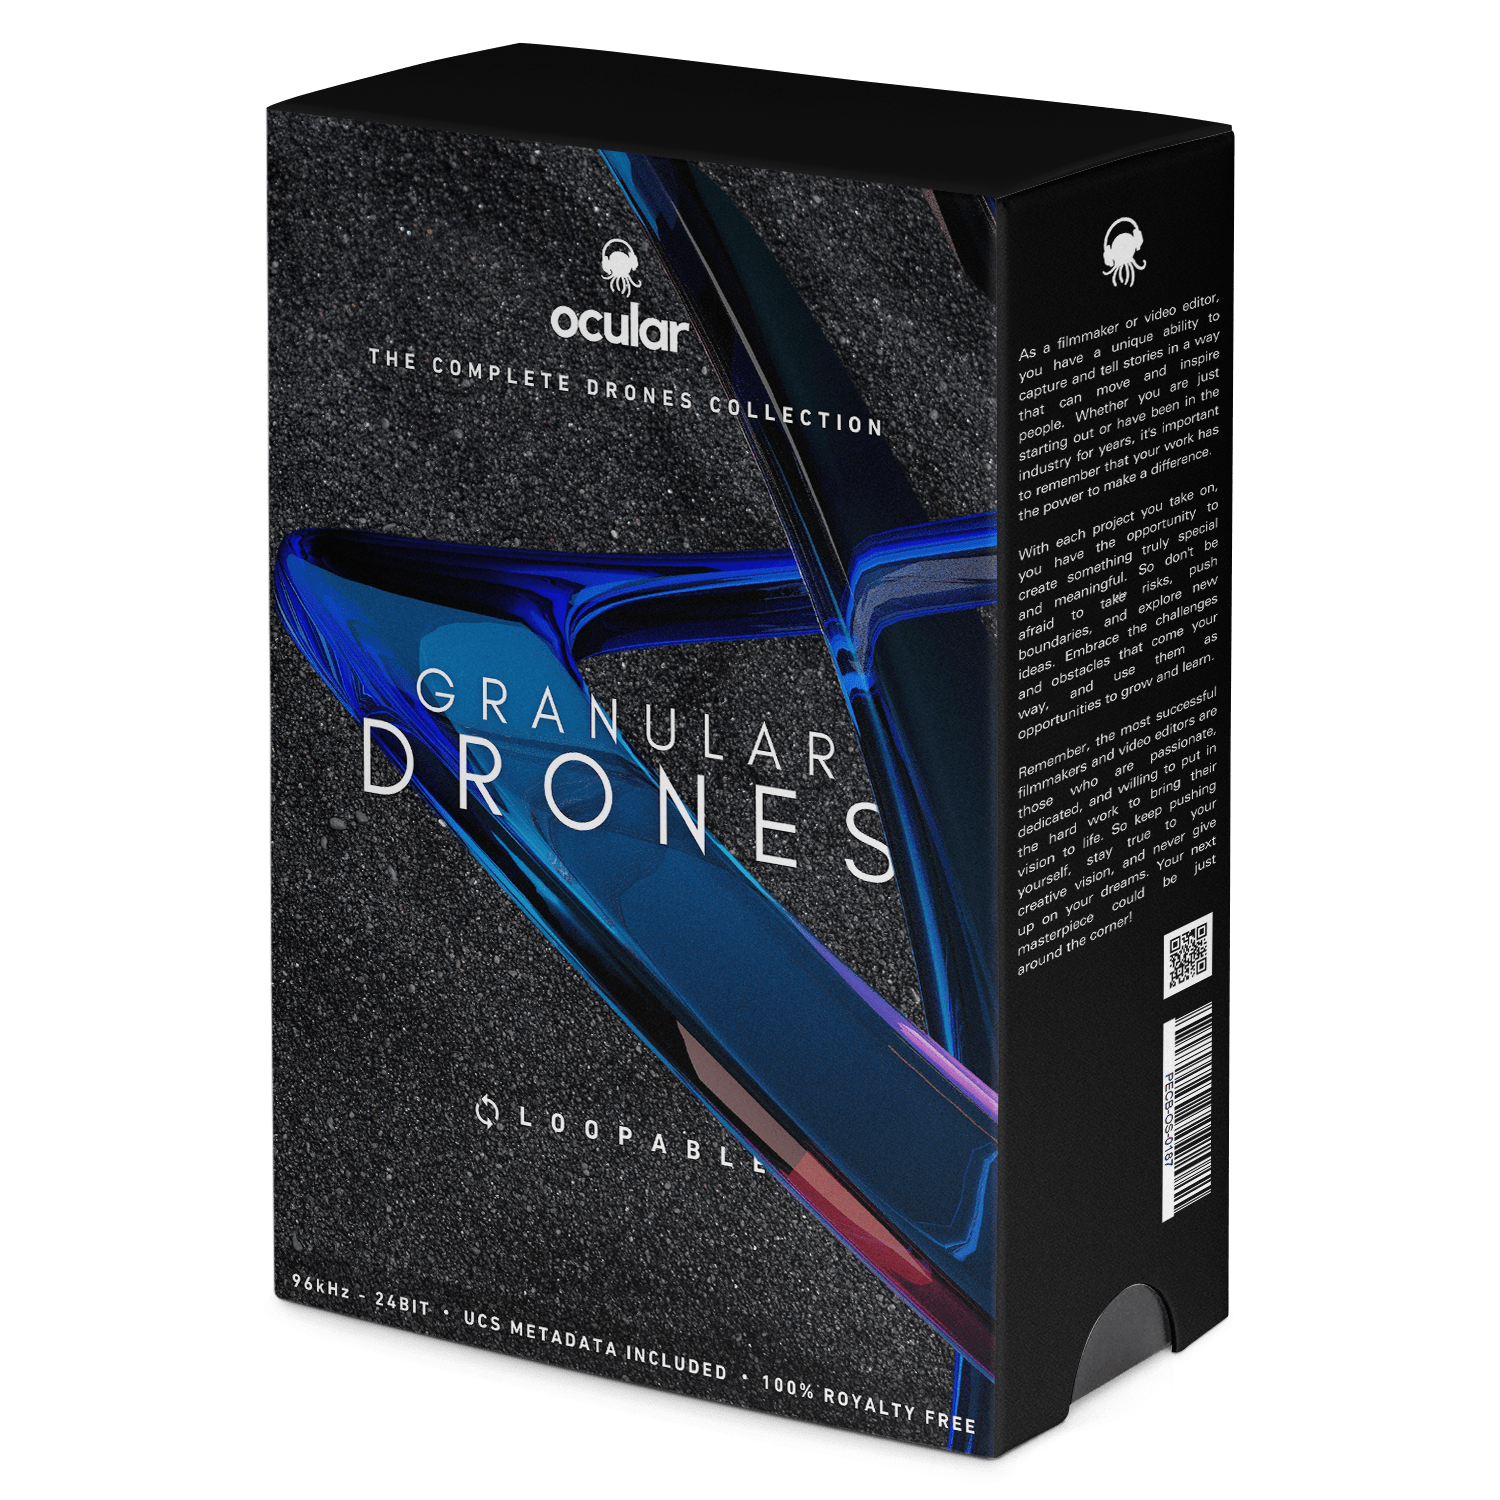 THE COMPLETE DRONES COLLECTION